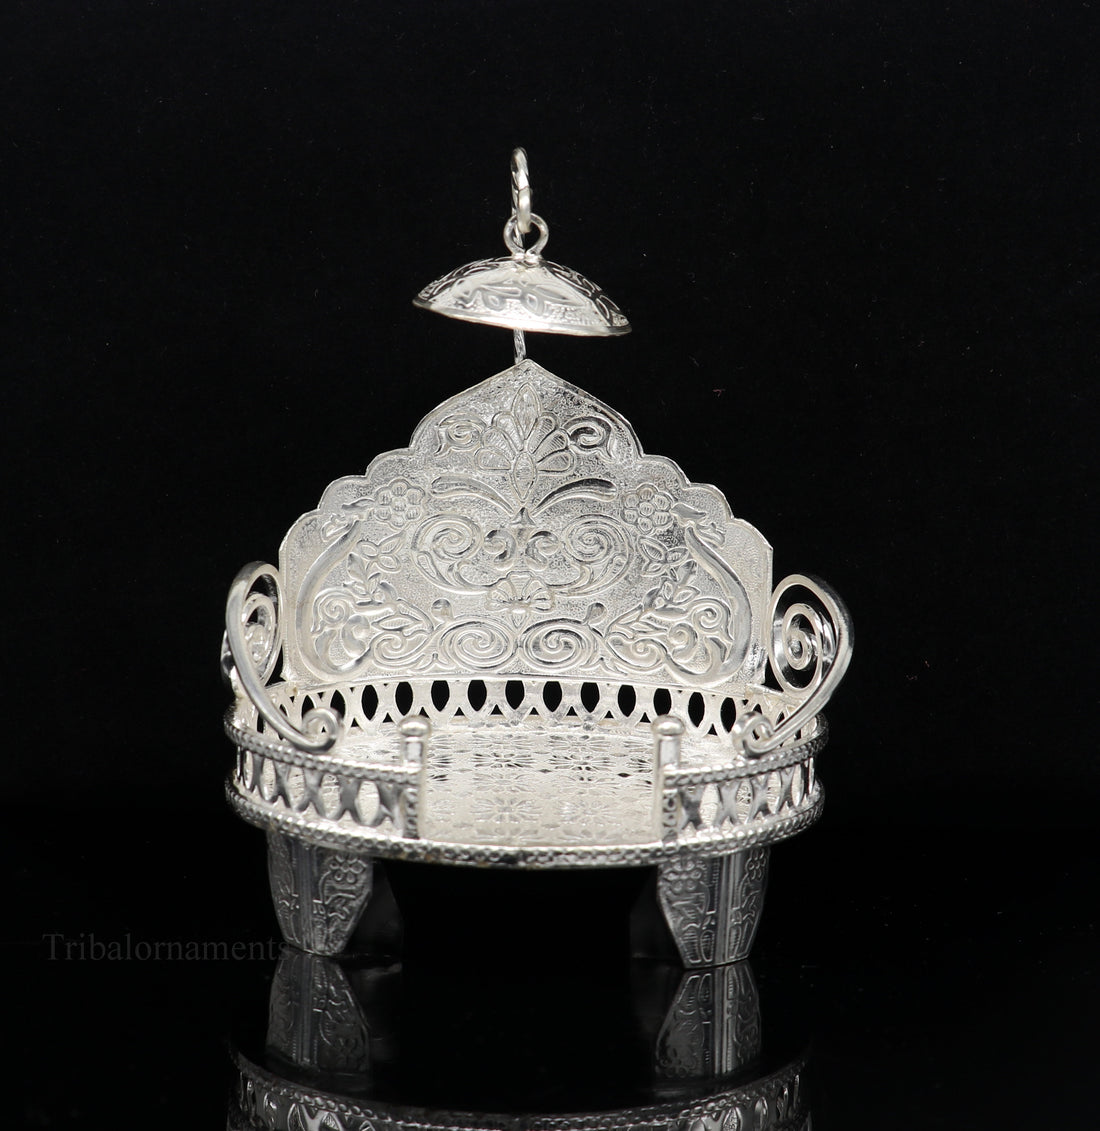 925 pure sterling silver Handmade Divine Singhasan, idol Silver throne, god statue's stand chair, temple art puja article india su486 - TRIBAL ORNAMENTS